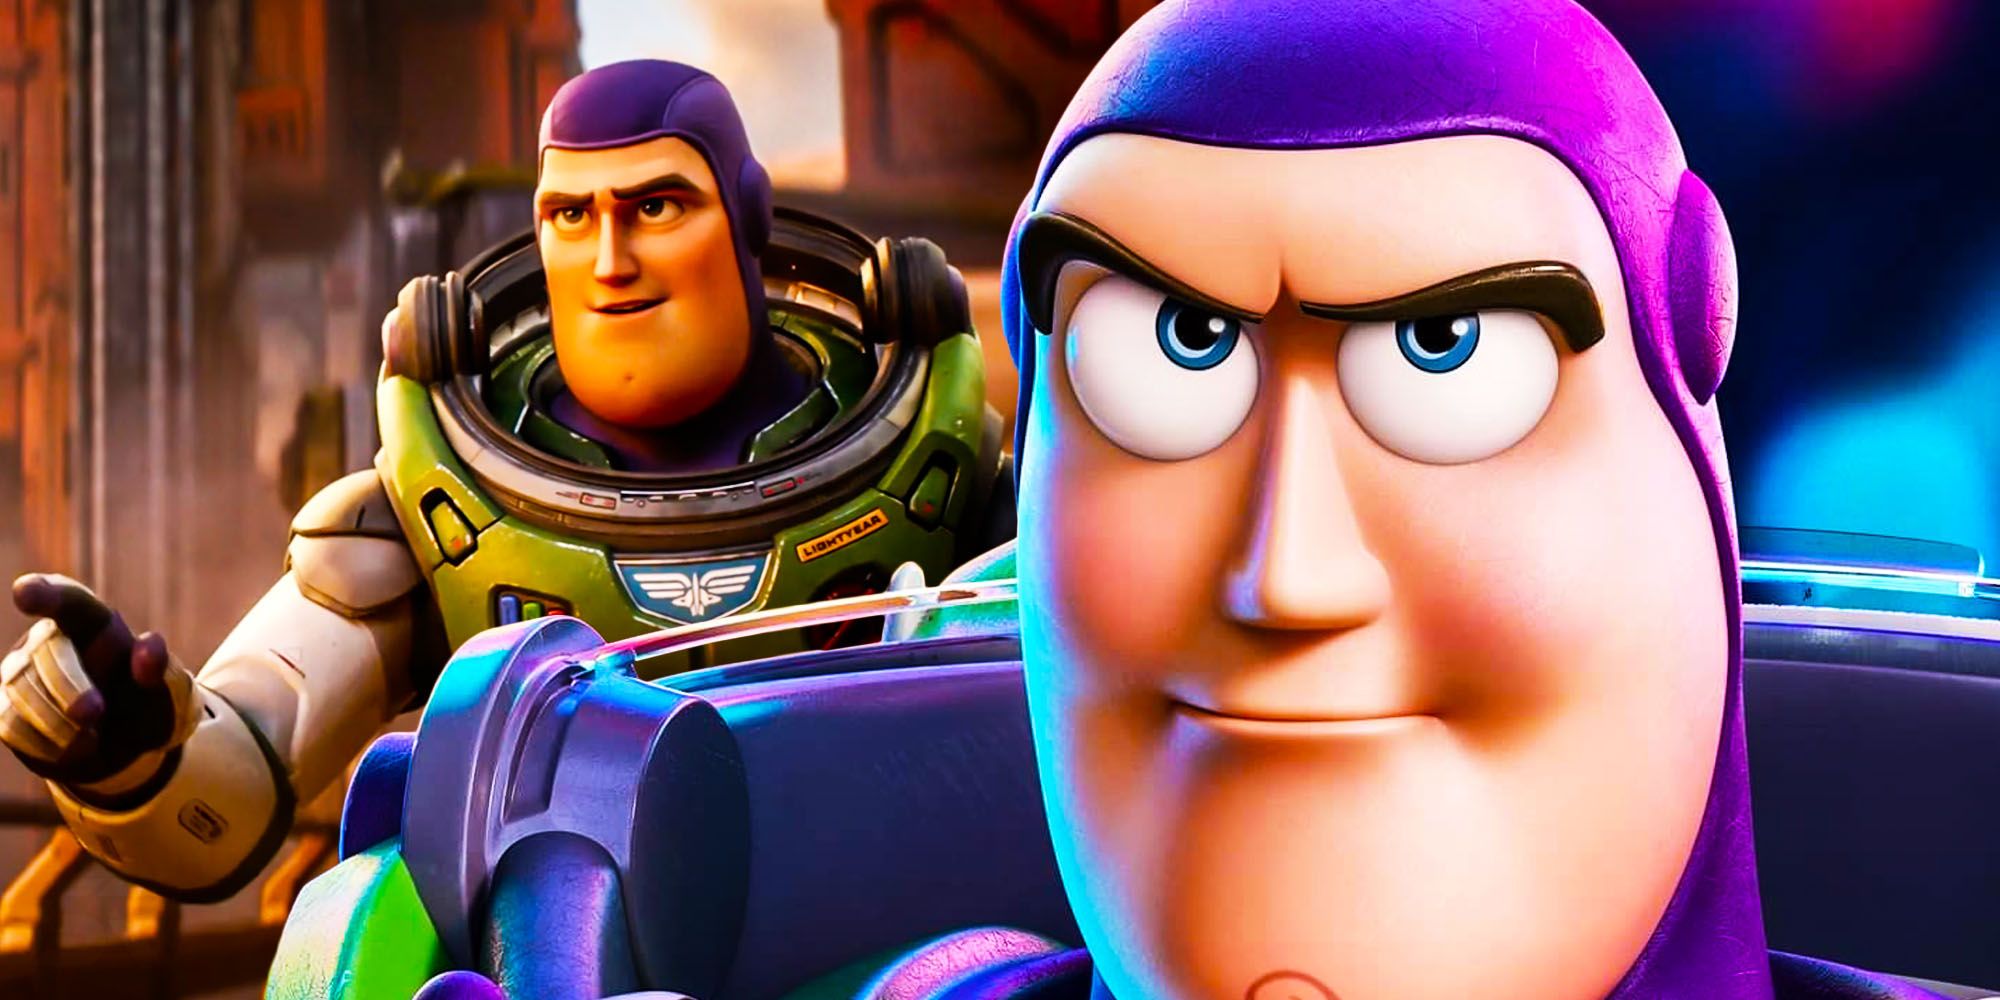 How The Lightyear Movie Connects To The Toy Story Movies